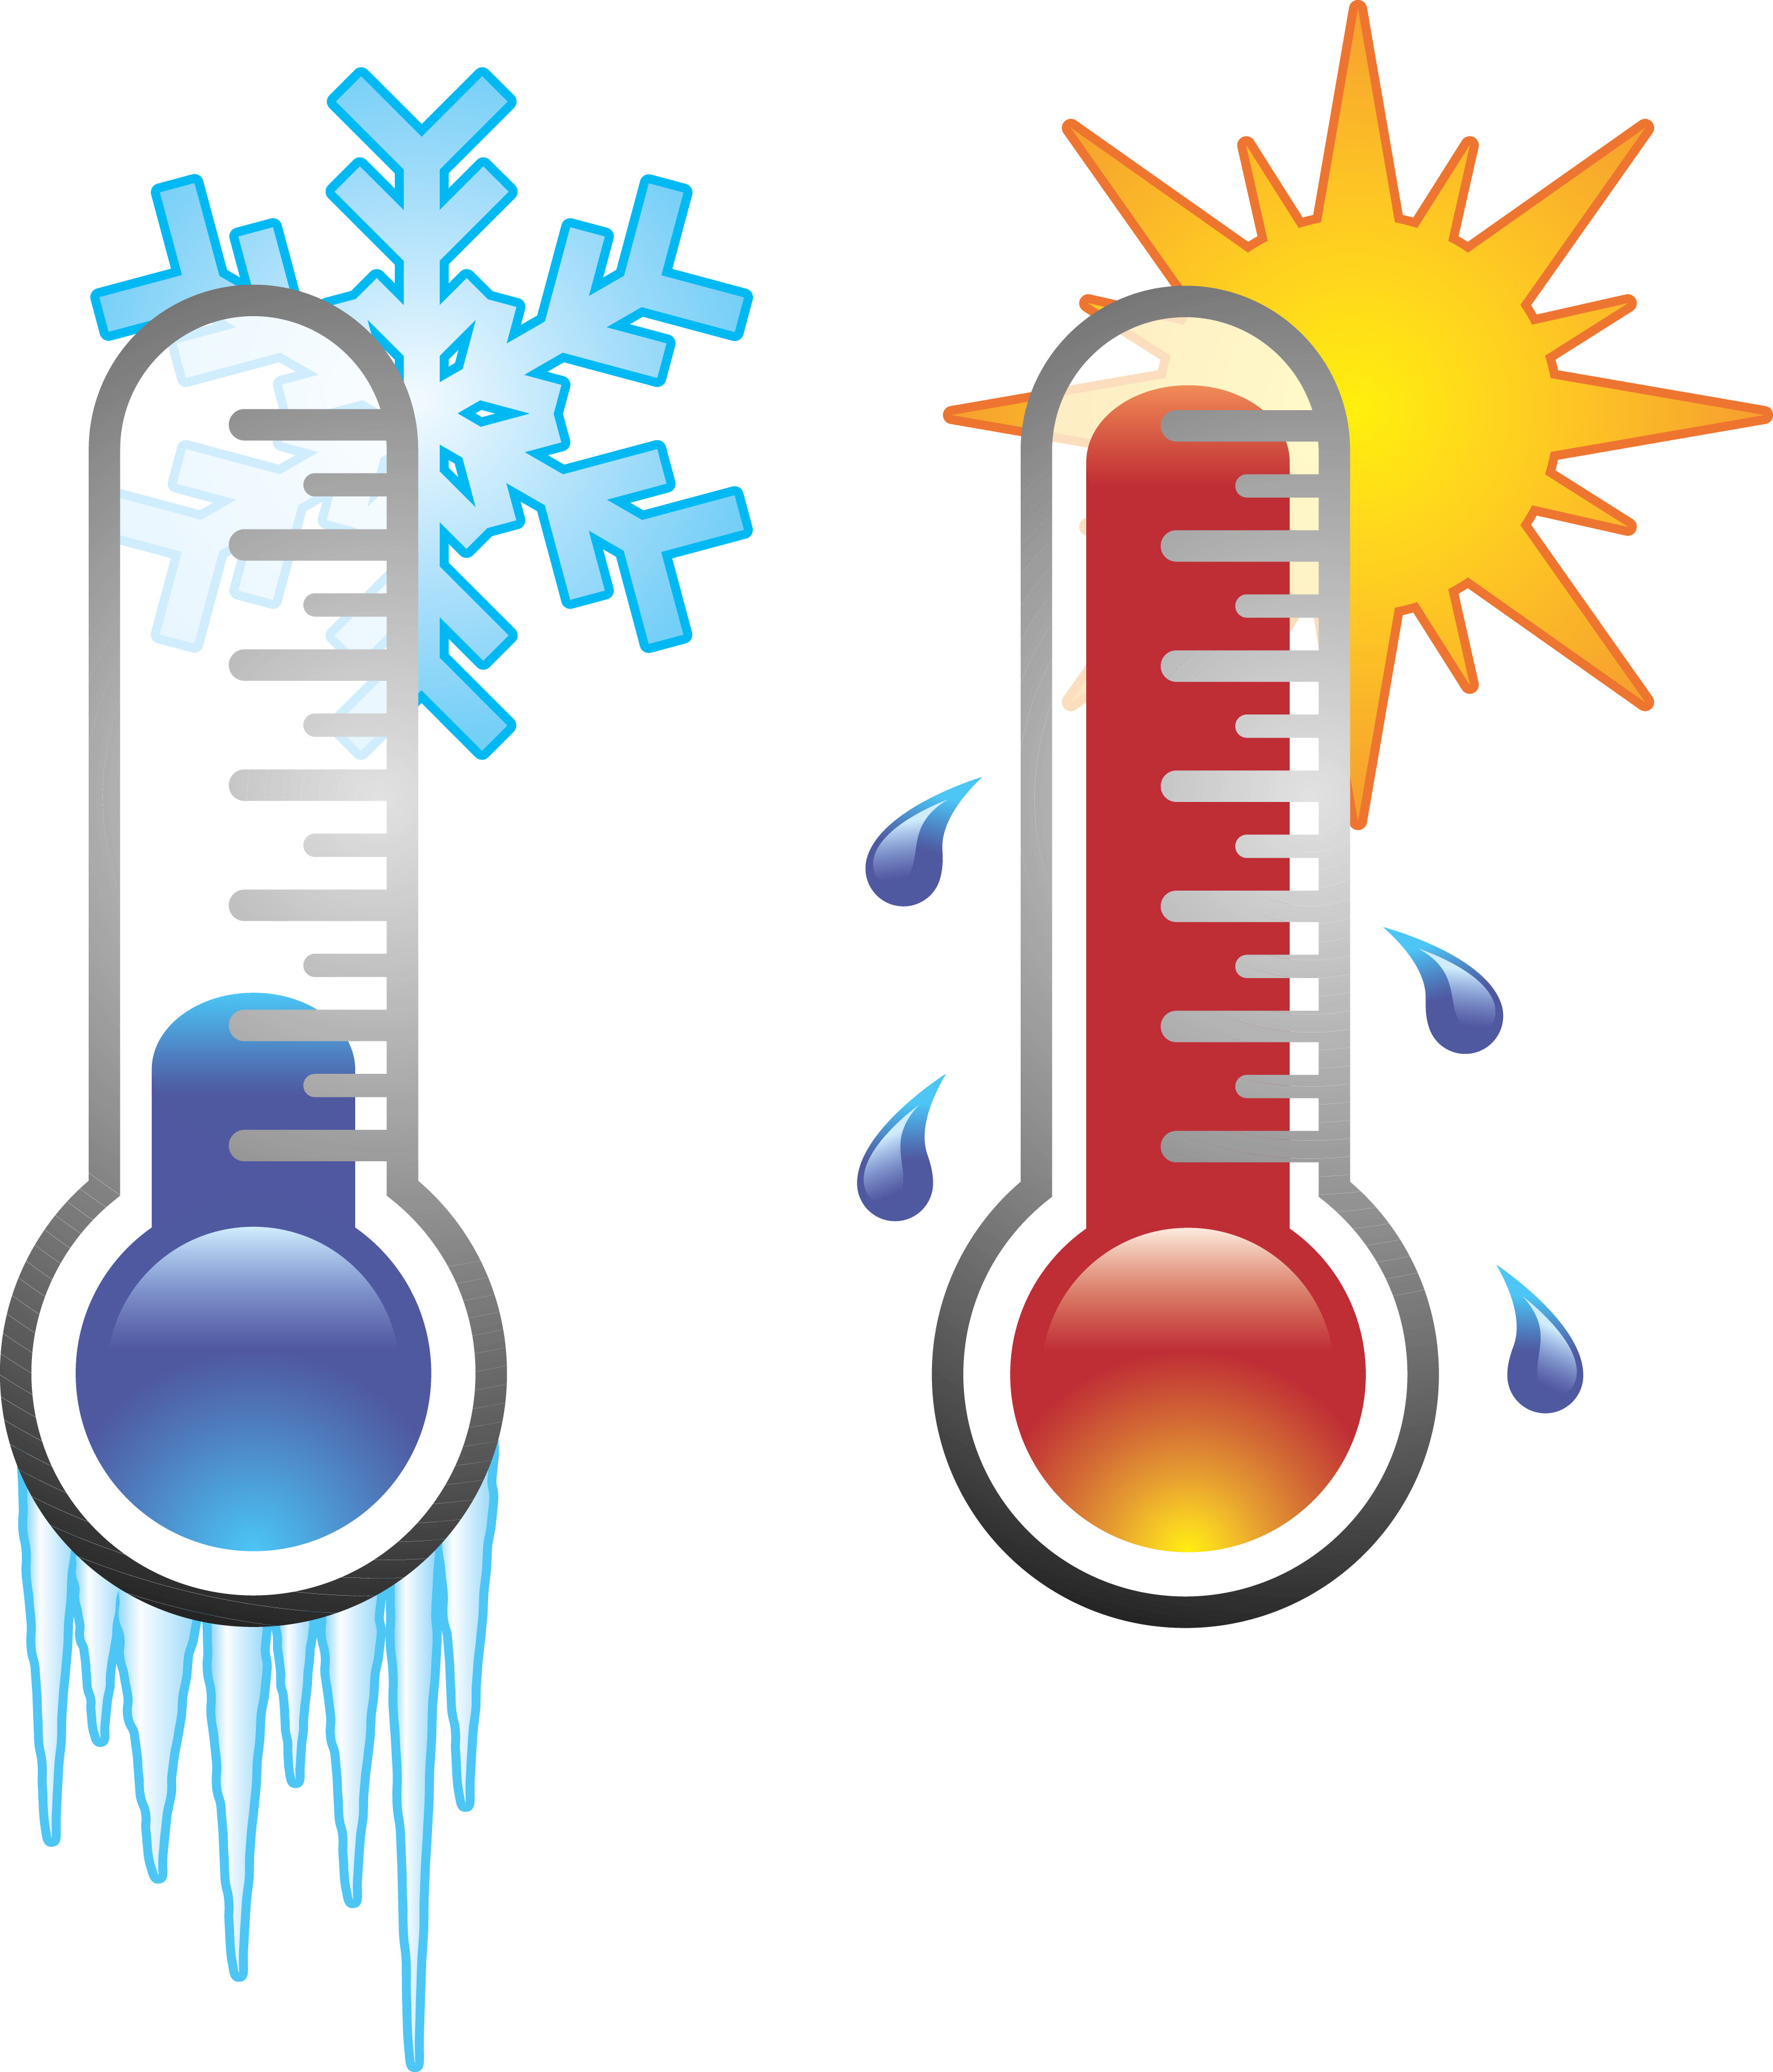 Hot and cold. winter clipart thermometer clipart, transparent - 719.75Kb 30...